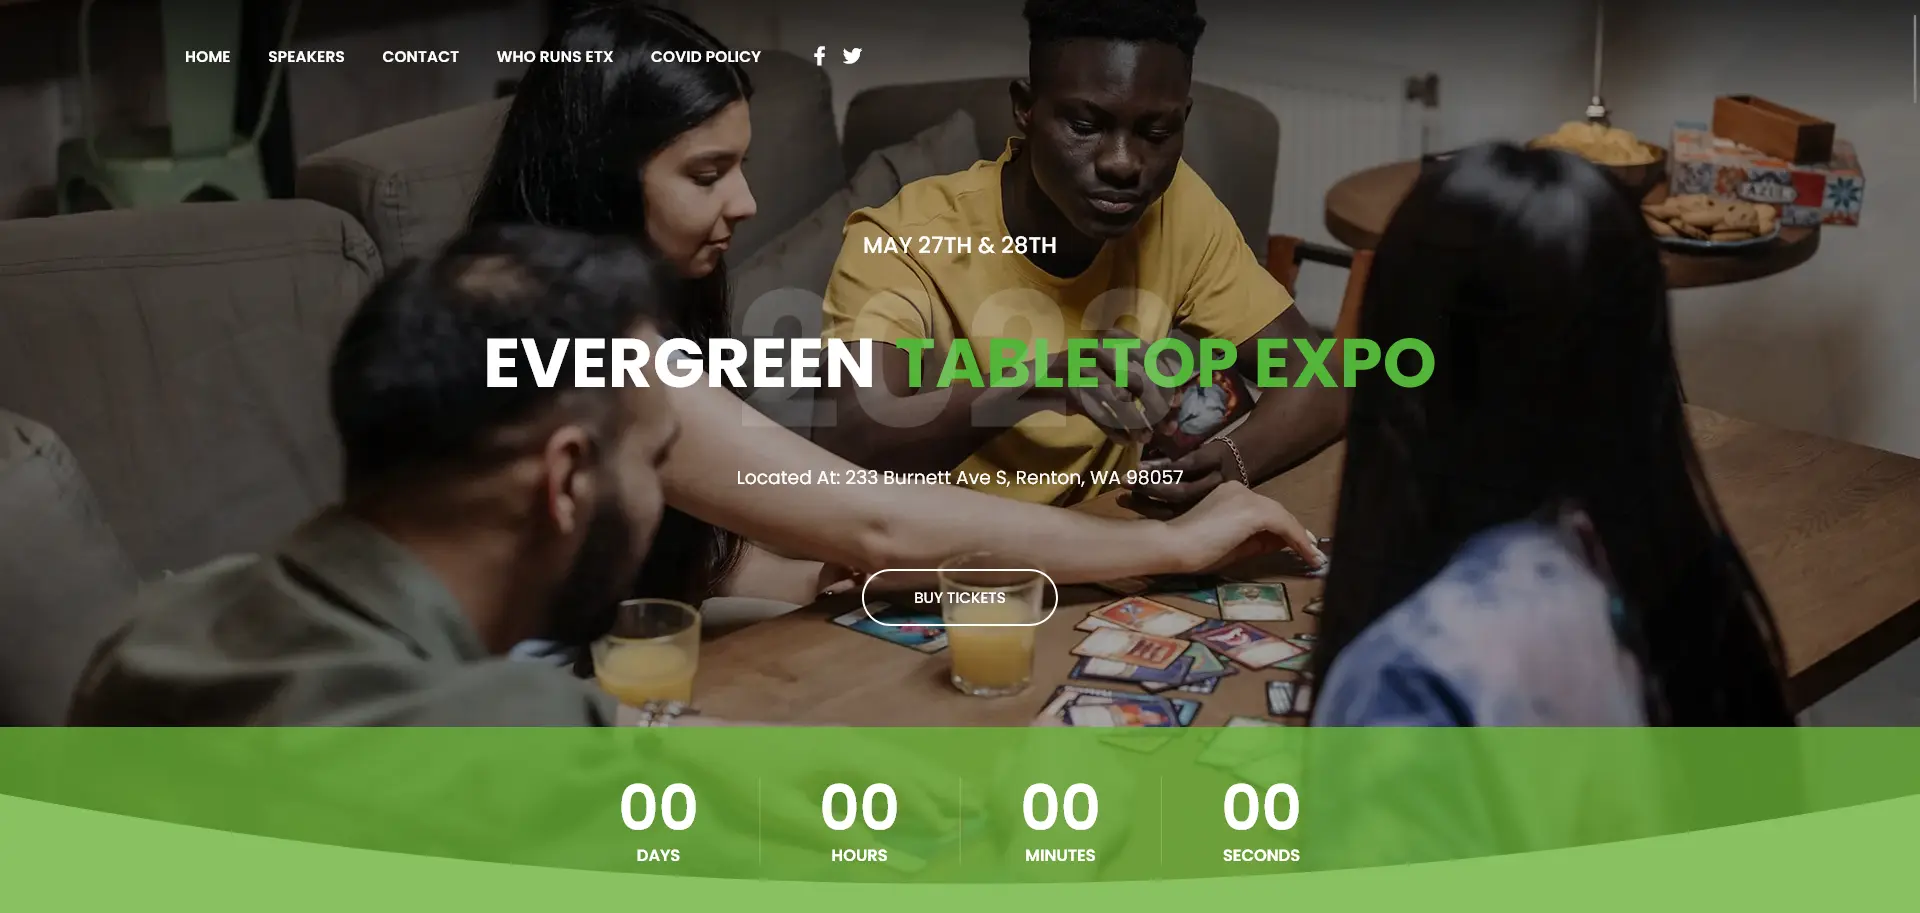 The website for Evergreen Tabletop Expo.